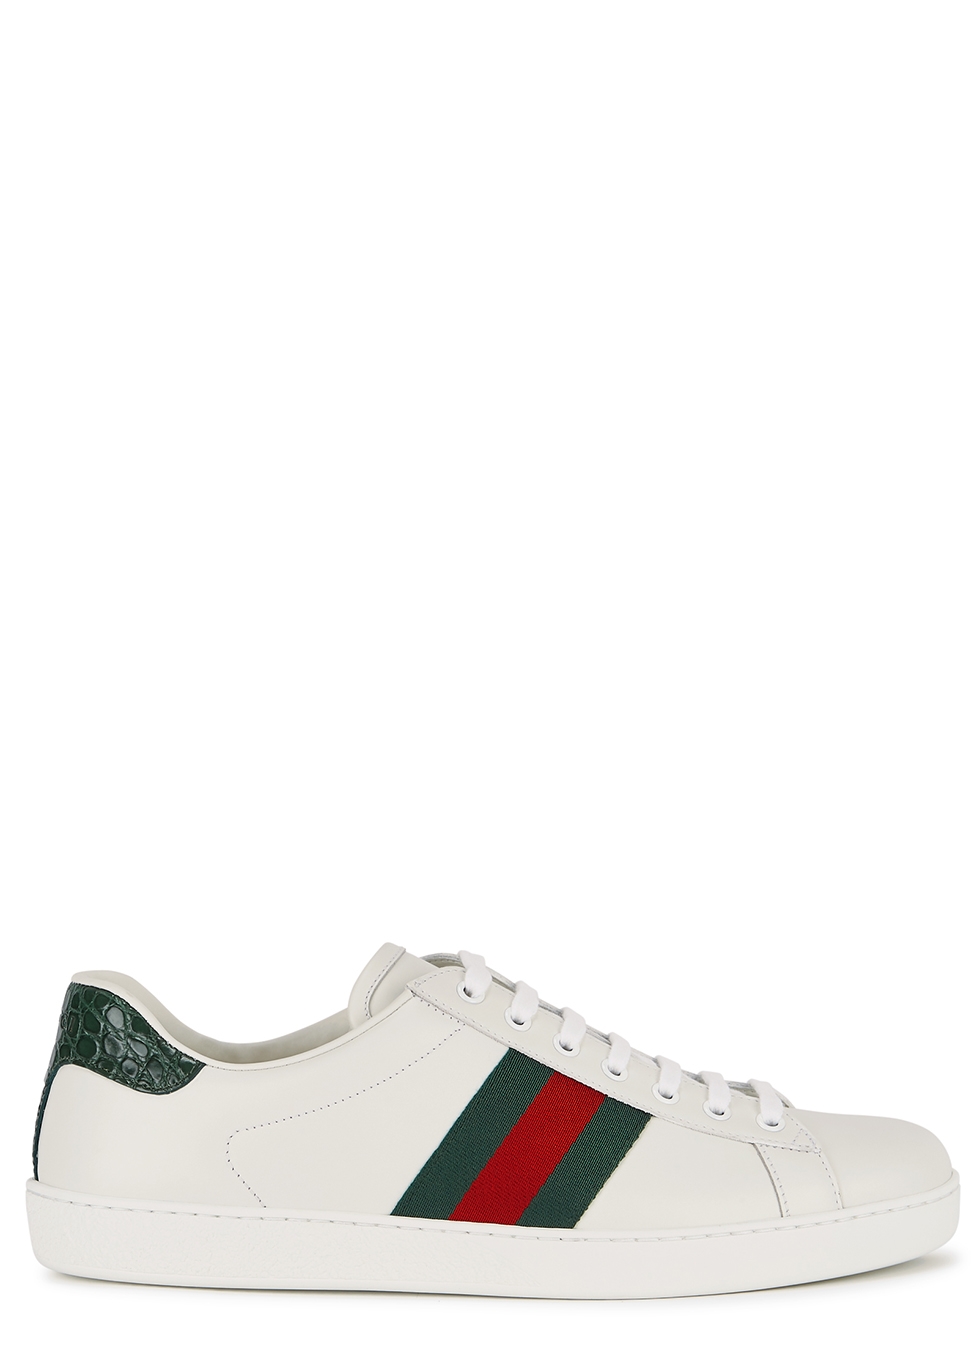 Gucci Ace white leather sneakers 